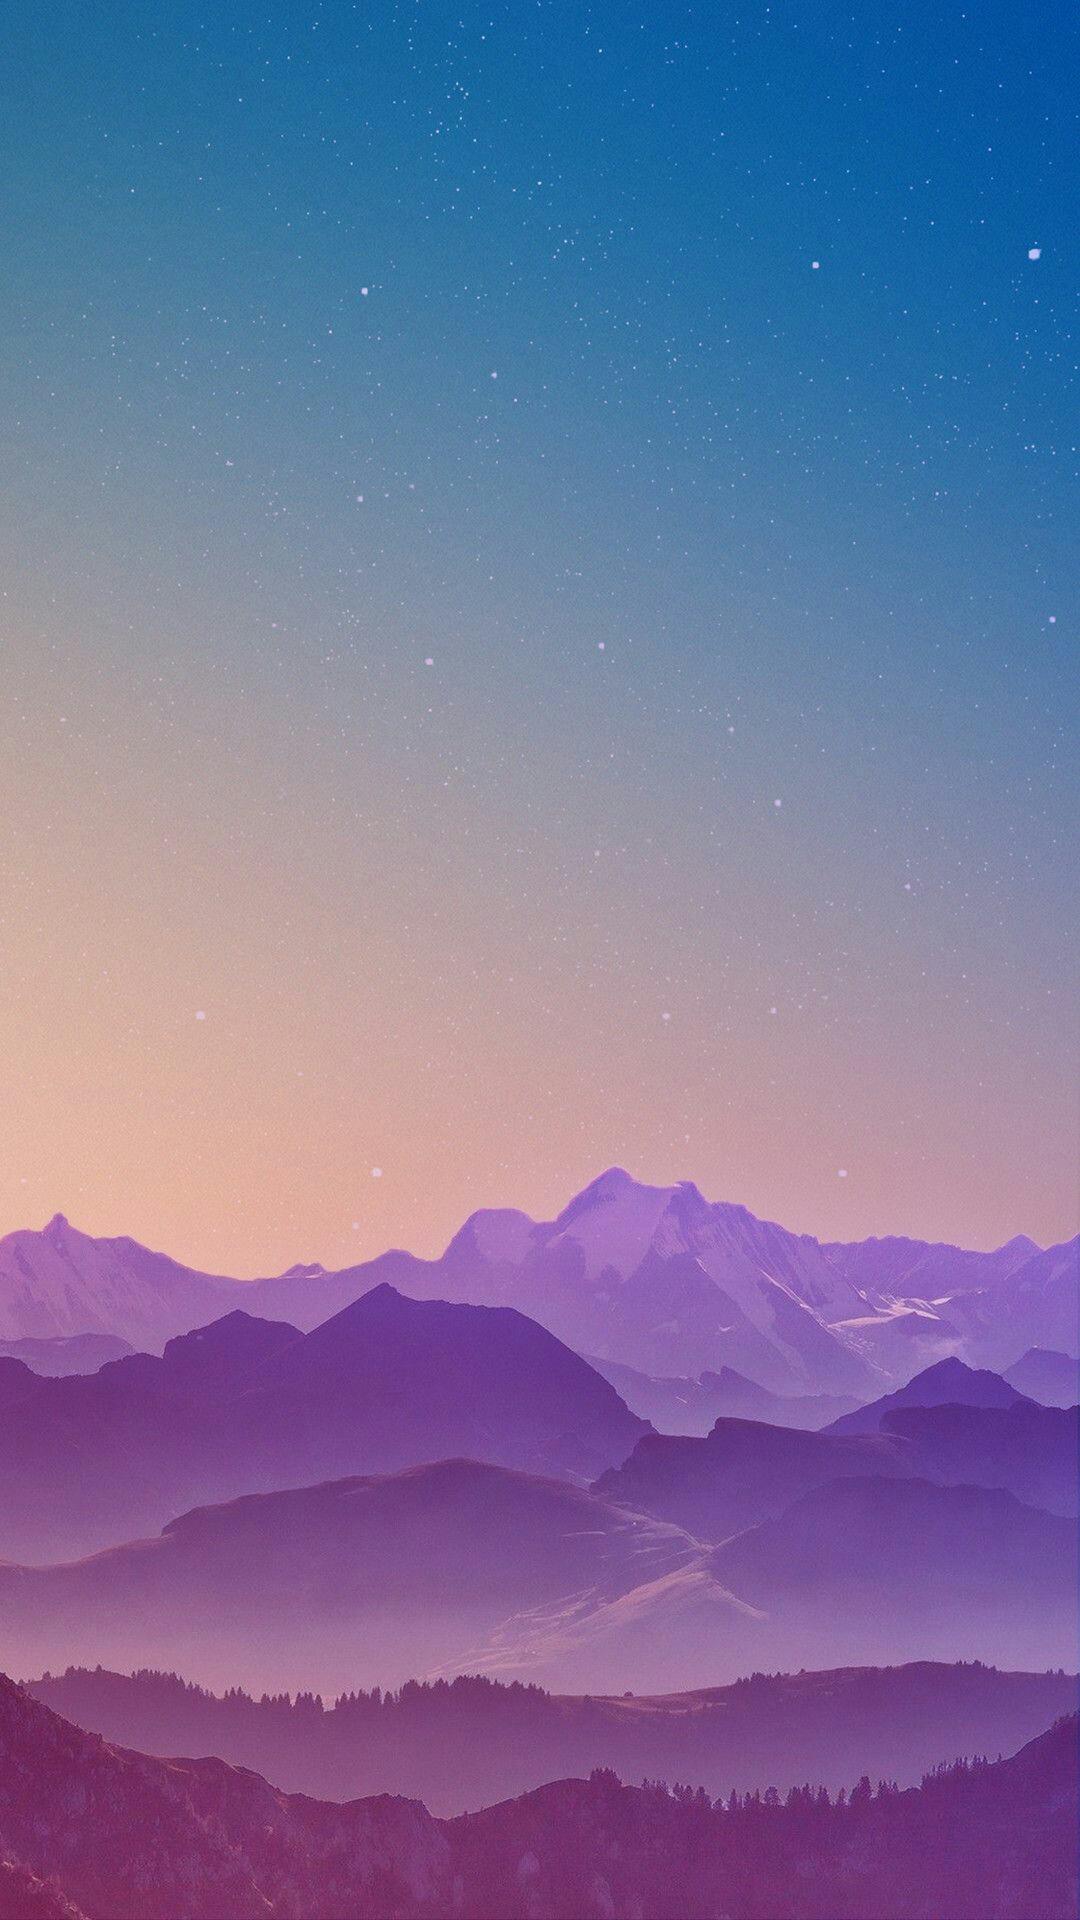 IPhone wallpaper of the day:<ref> iPhone wallpaper of the day - Low poly